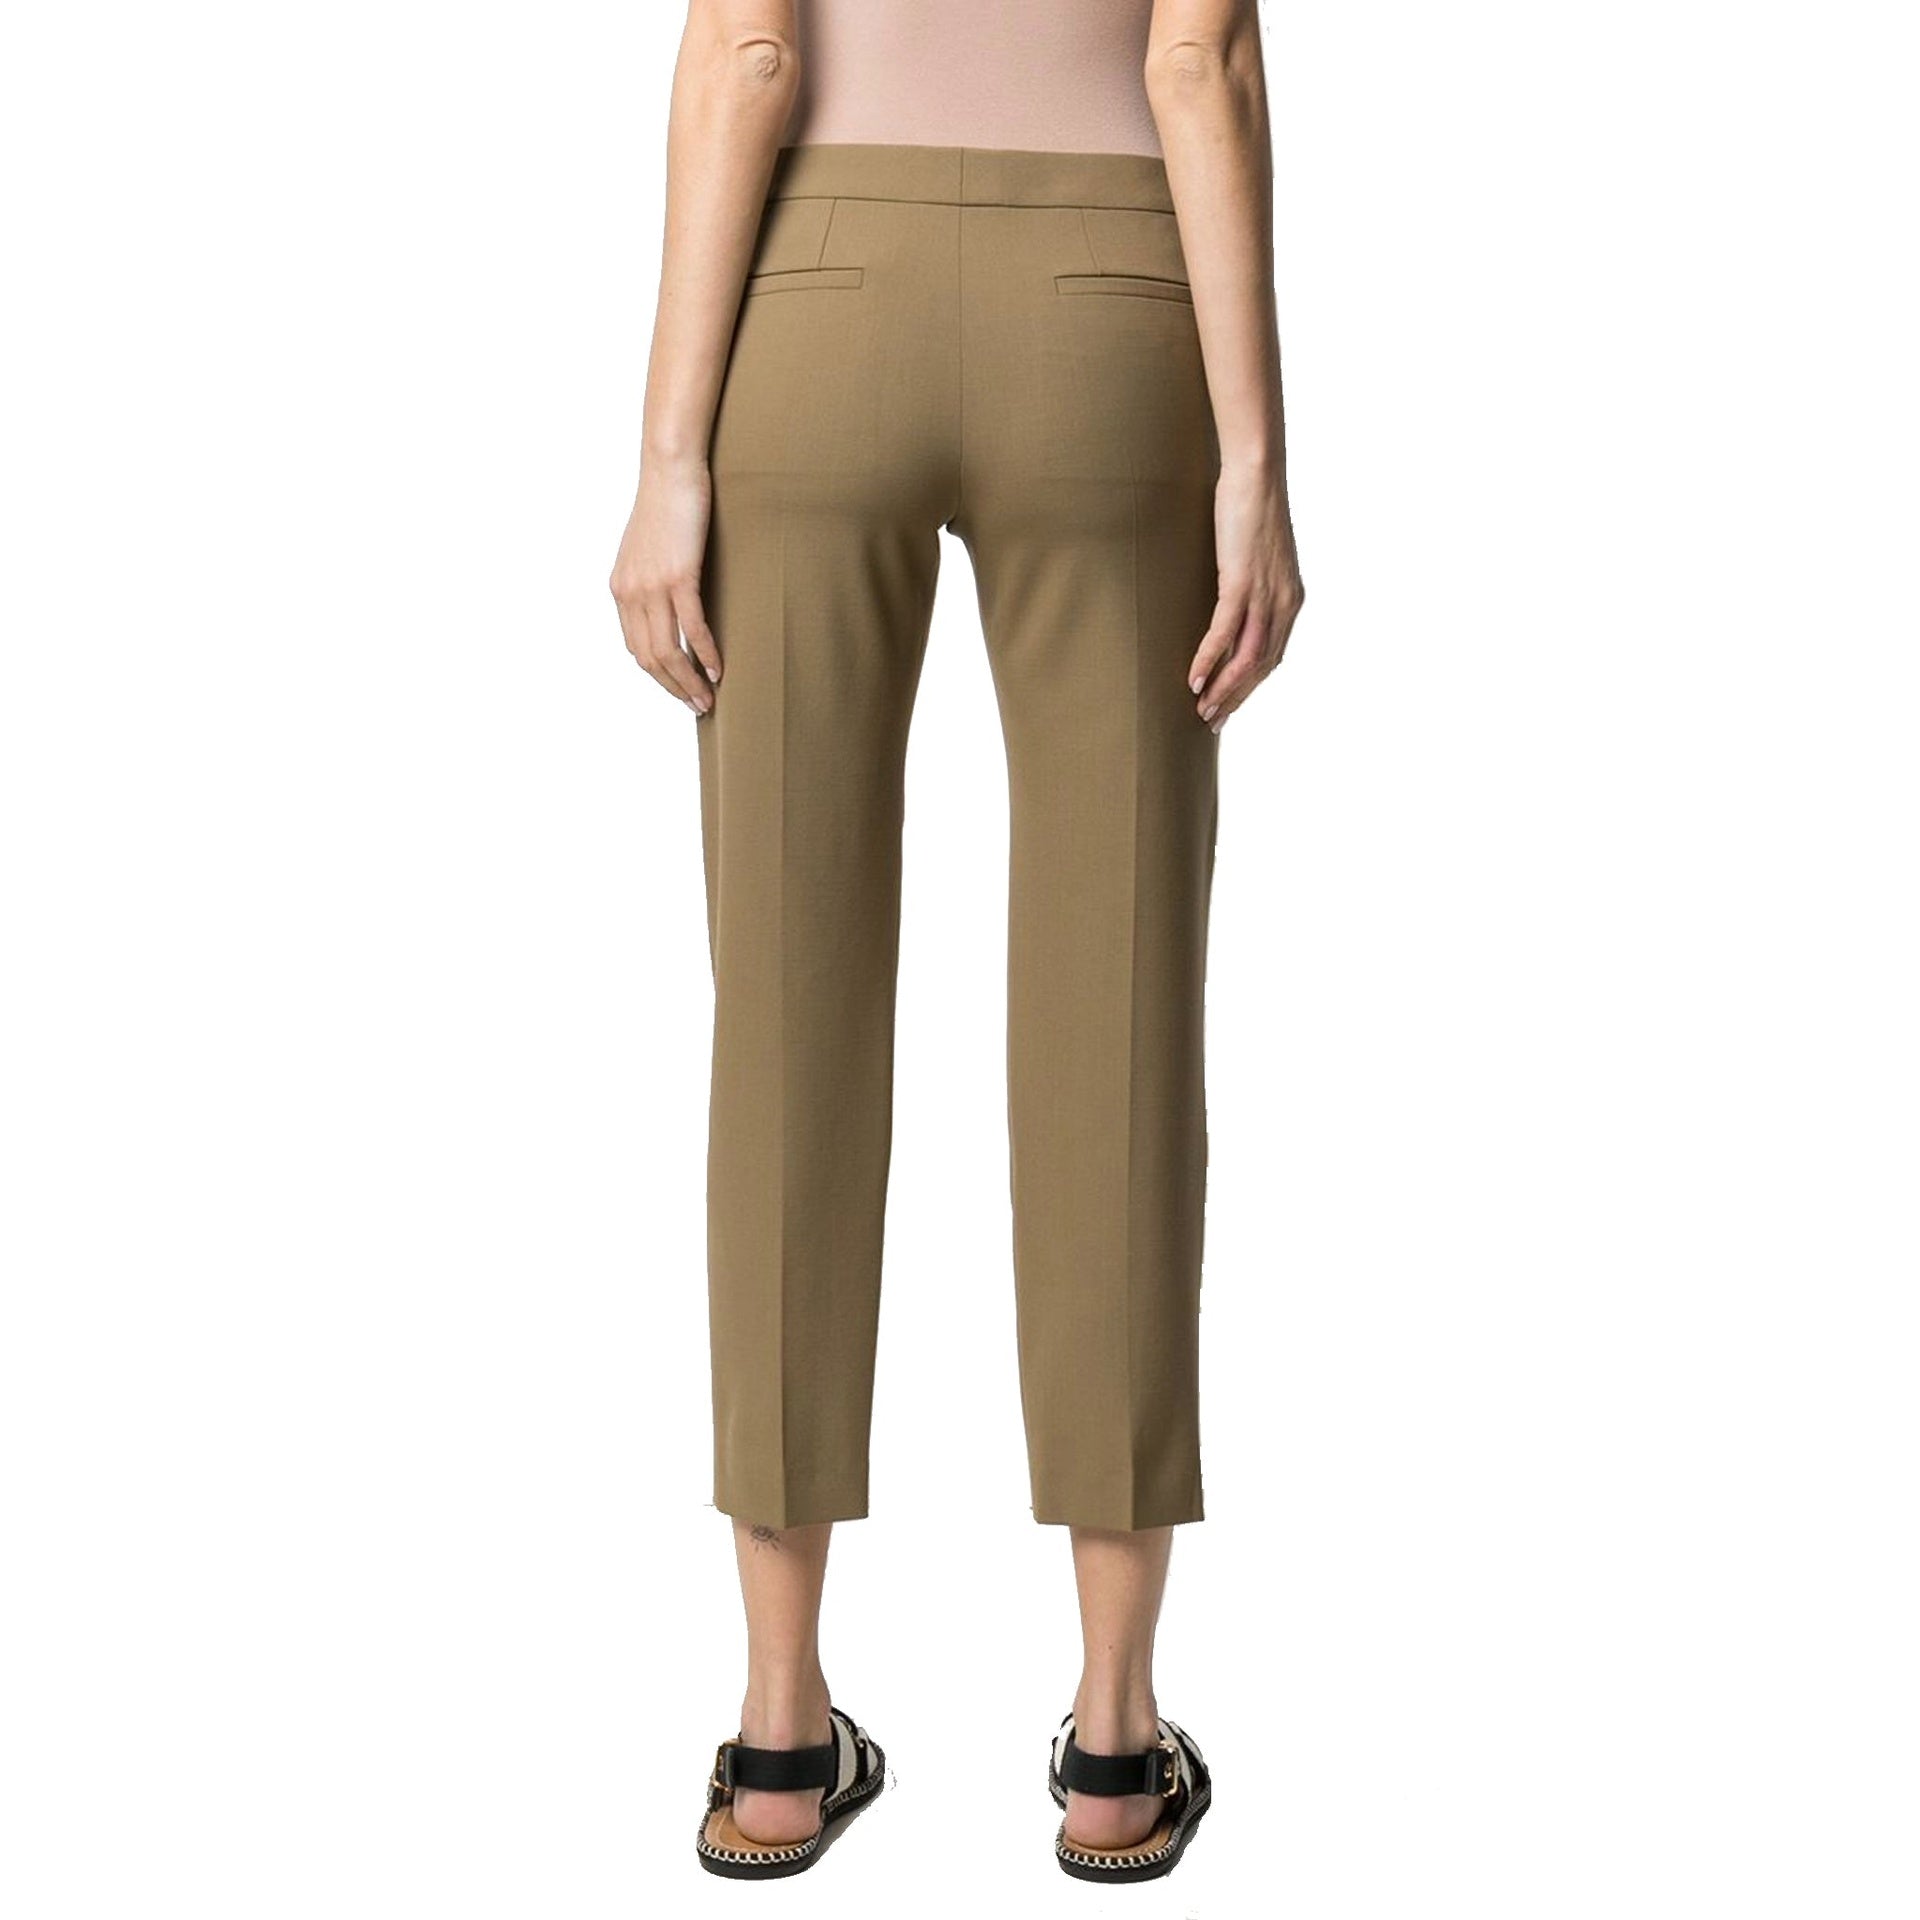 CHLOE-OUTLET-SALE-Chloe-Cropped-Tailored-Trousers-Hosen-BROWN-40-ARCHIVE-COLLECTION-3.jpg